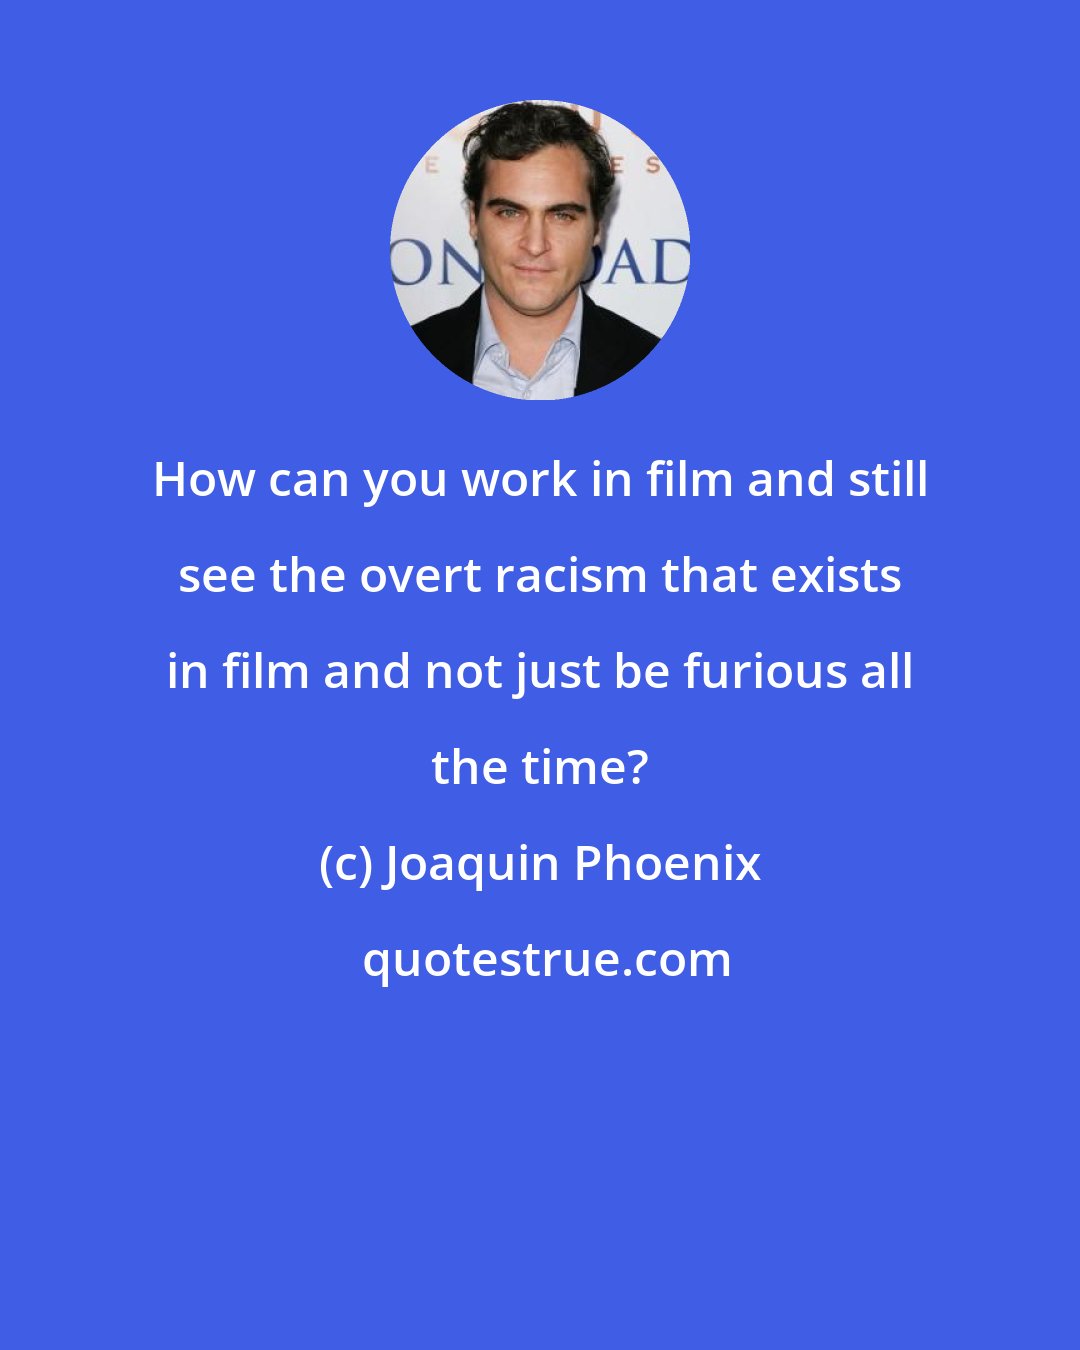 Joaquin Phoenix: How can you work in film and still see the overt racism that exists in film and not just be furious all the time?